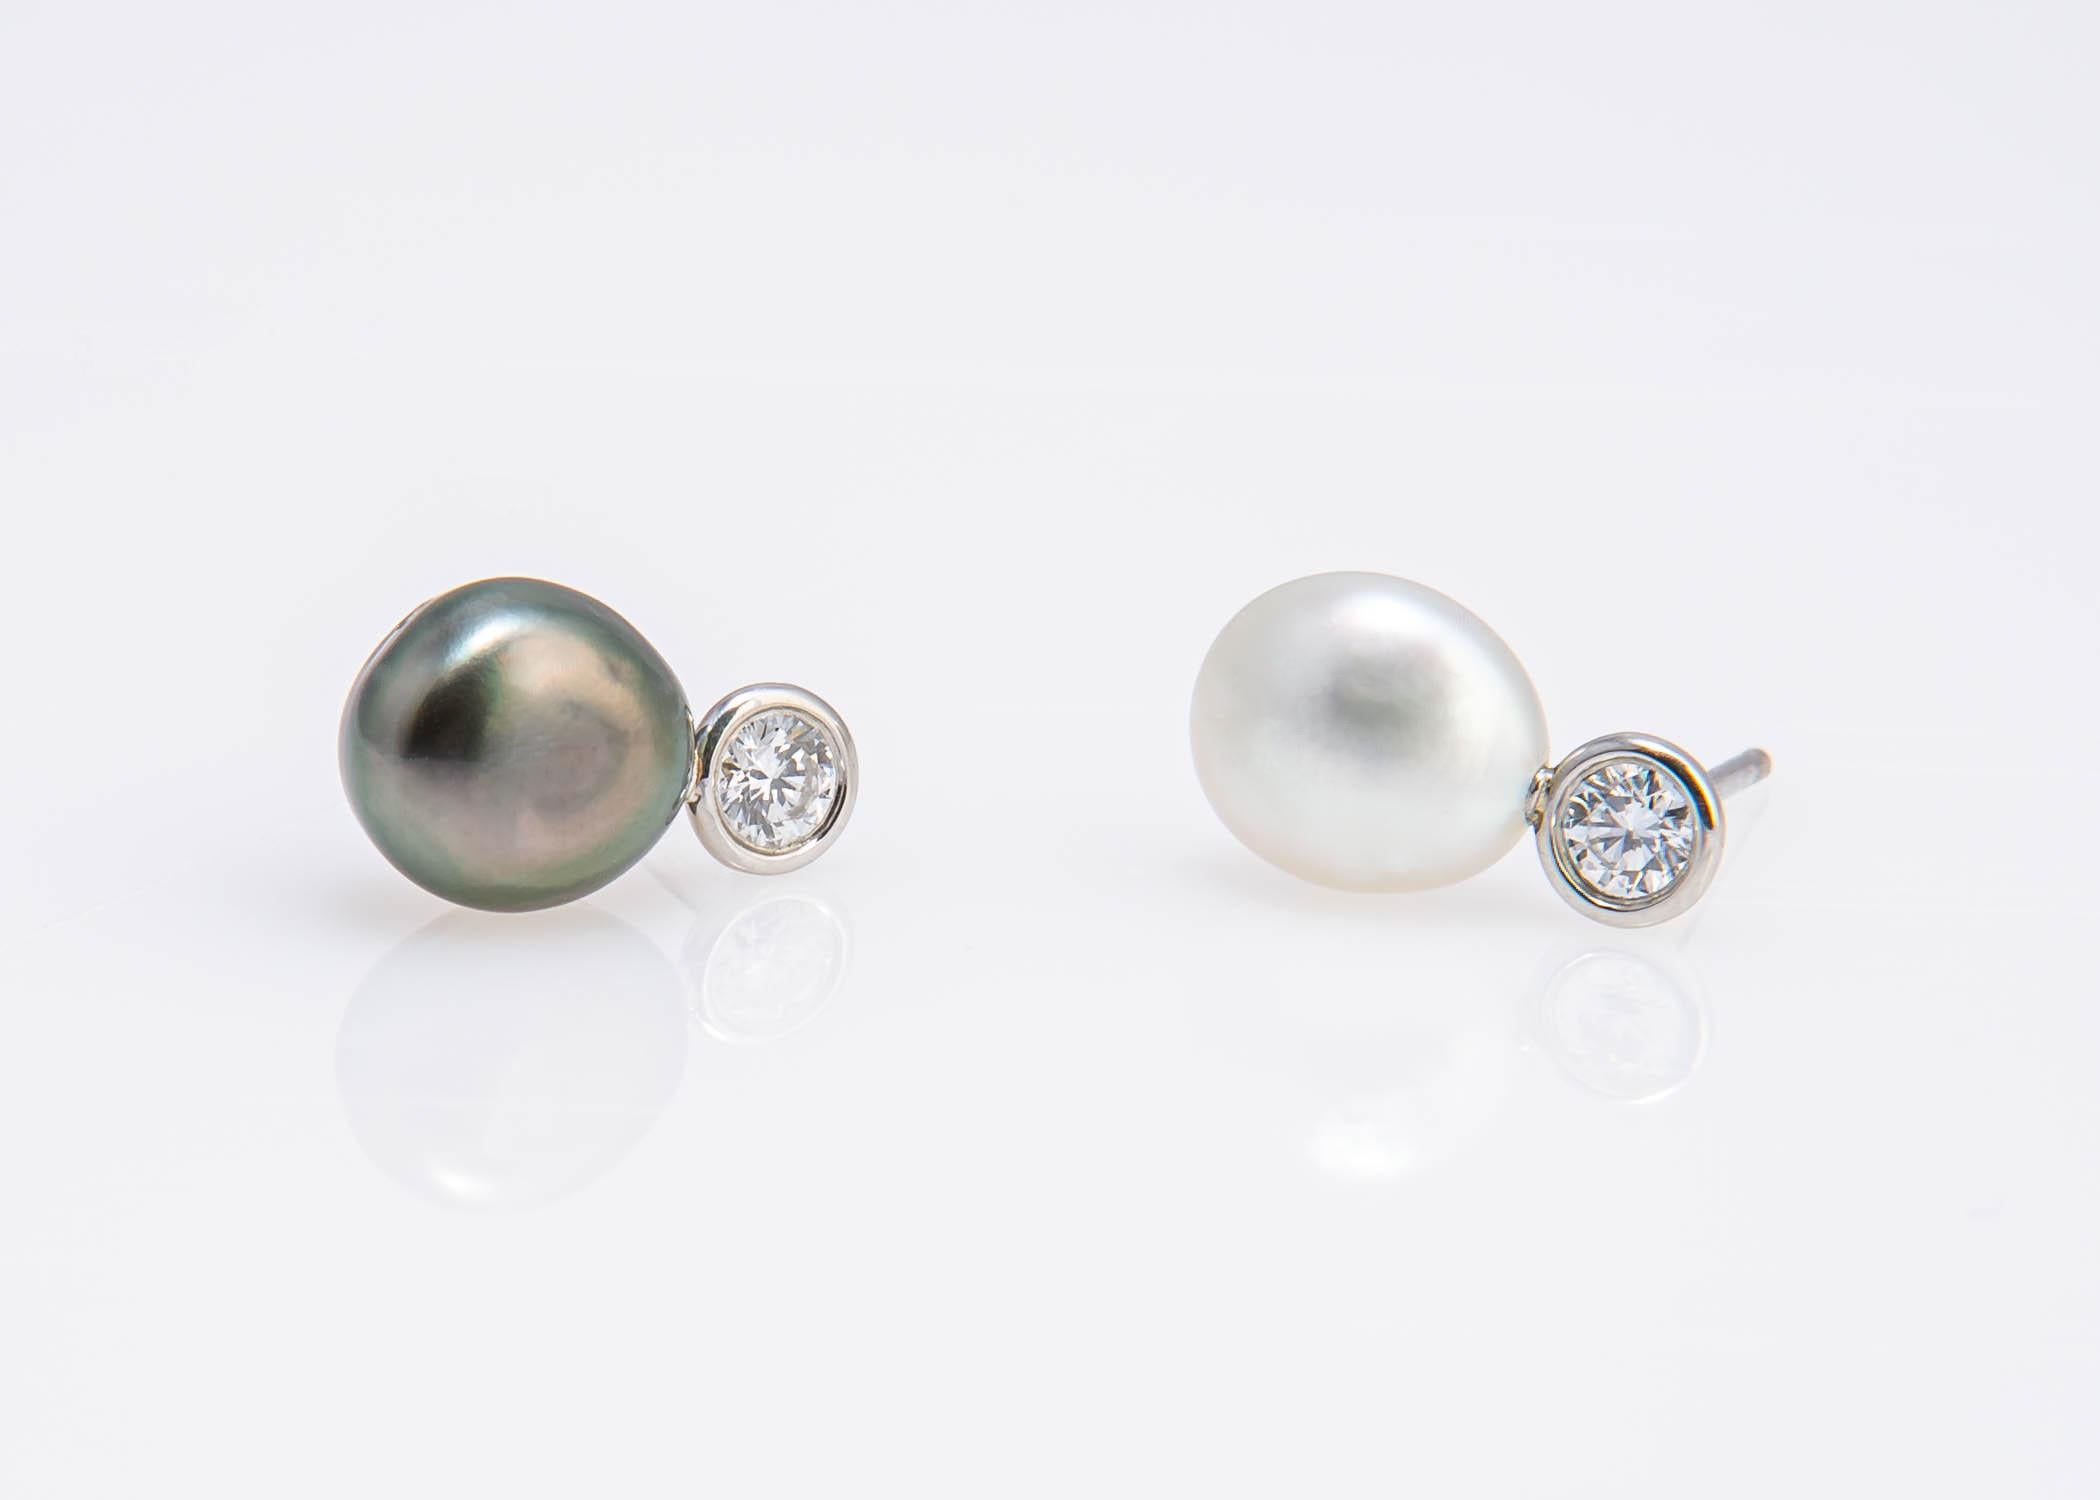 Simple and pure. Elsa Peretti pairs one black and one white Keshi pearl with two brilliant cut diamonds set in platinum to create this unique chic collectable pair of easy to wear earrings. Your new signature piece. The two diamonds total .28 carats